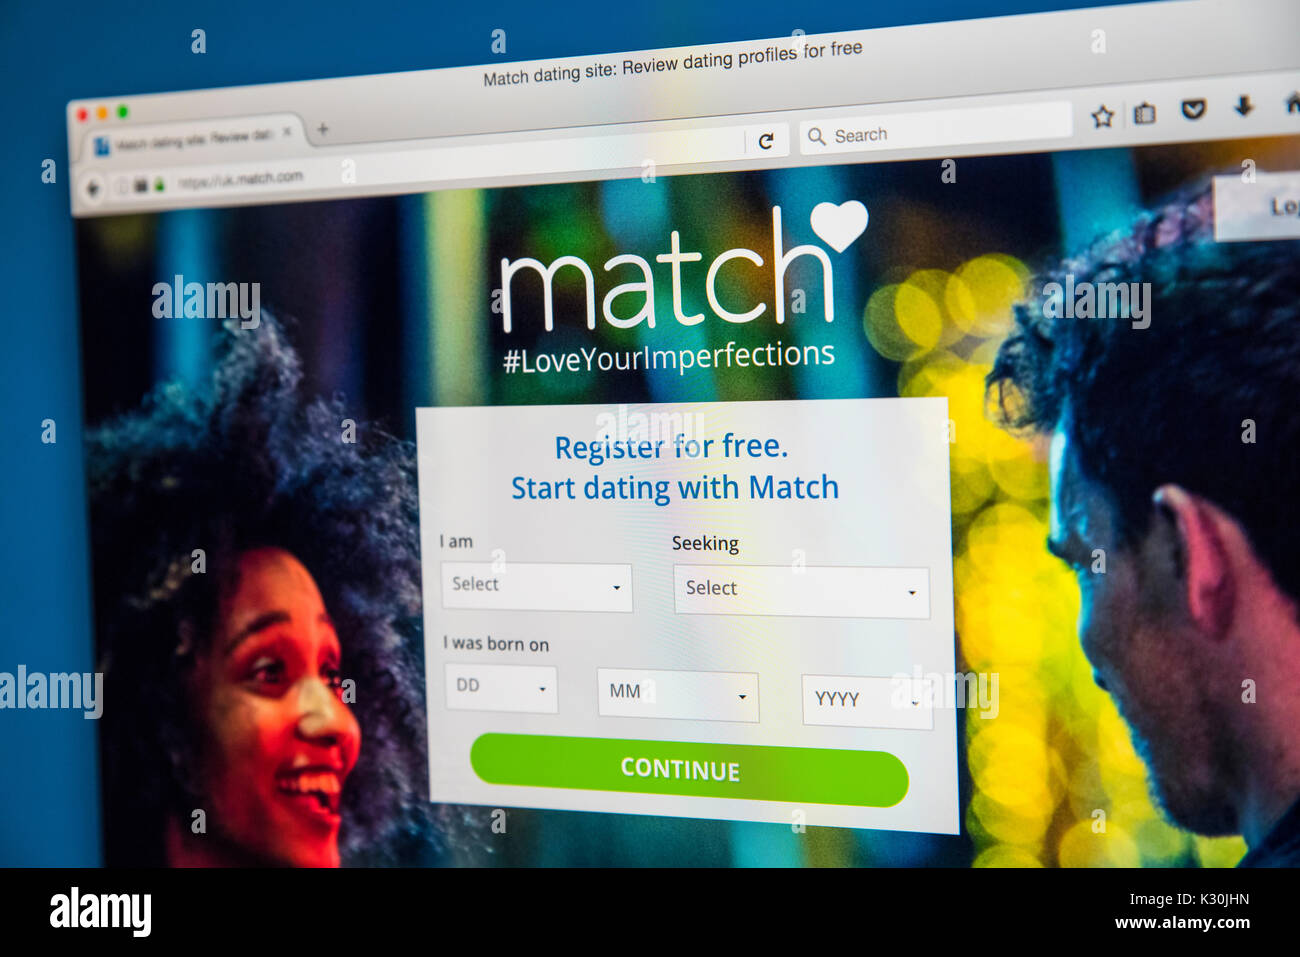 Match site. Dating Match картинки. Match.com. Select services dating Reviews.